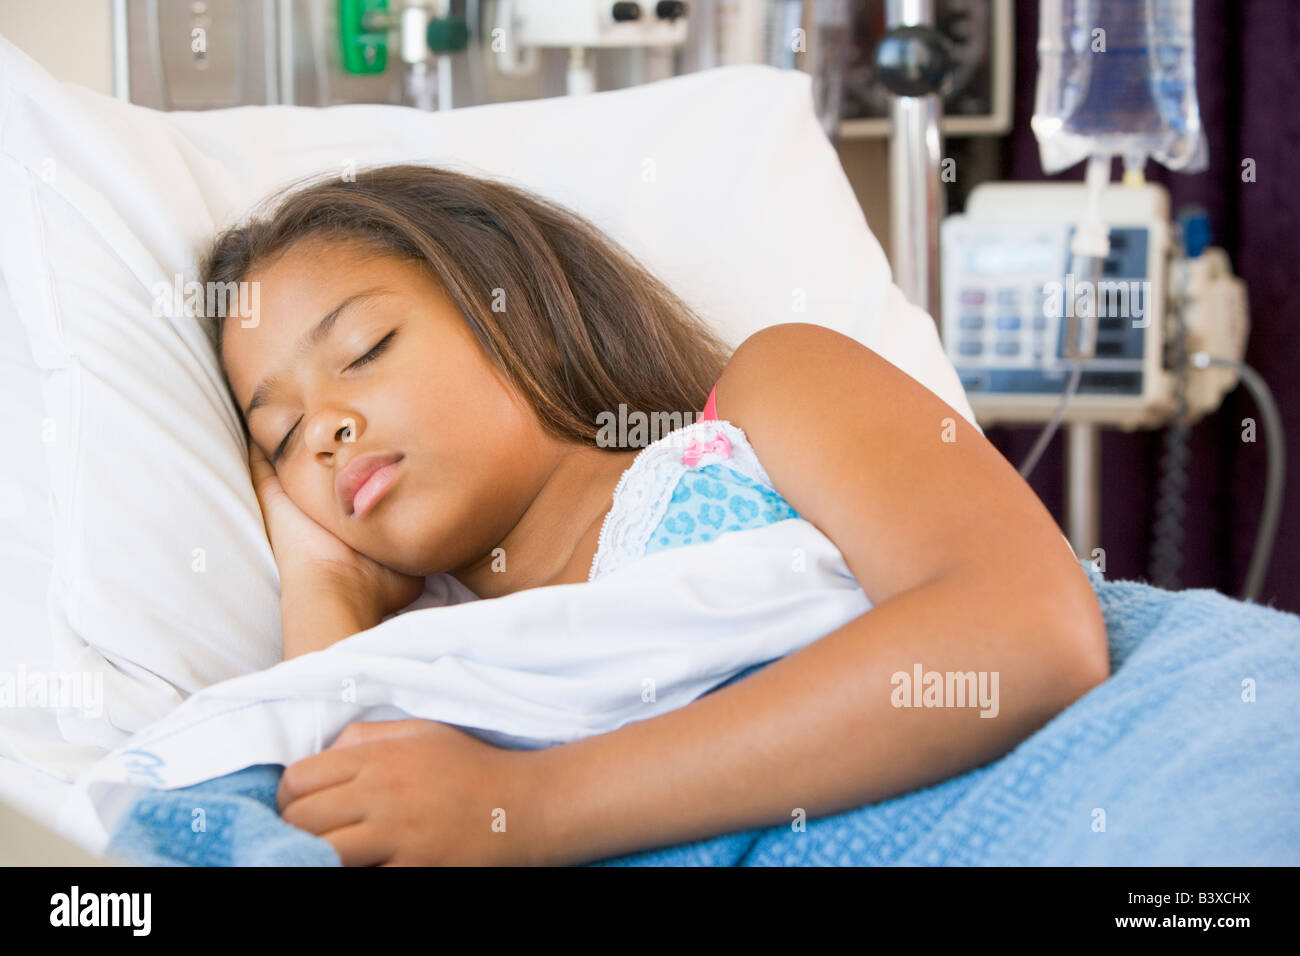 Young Girl Sleeping In Hospital Bed Stock Photo